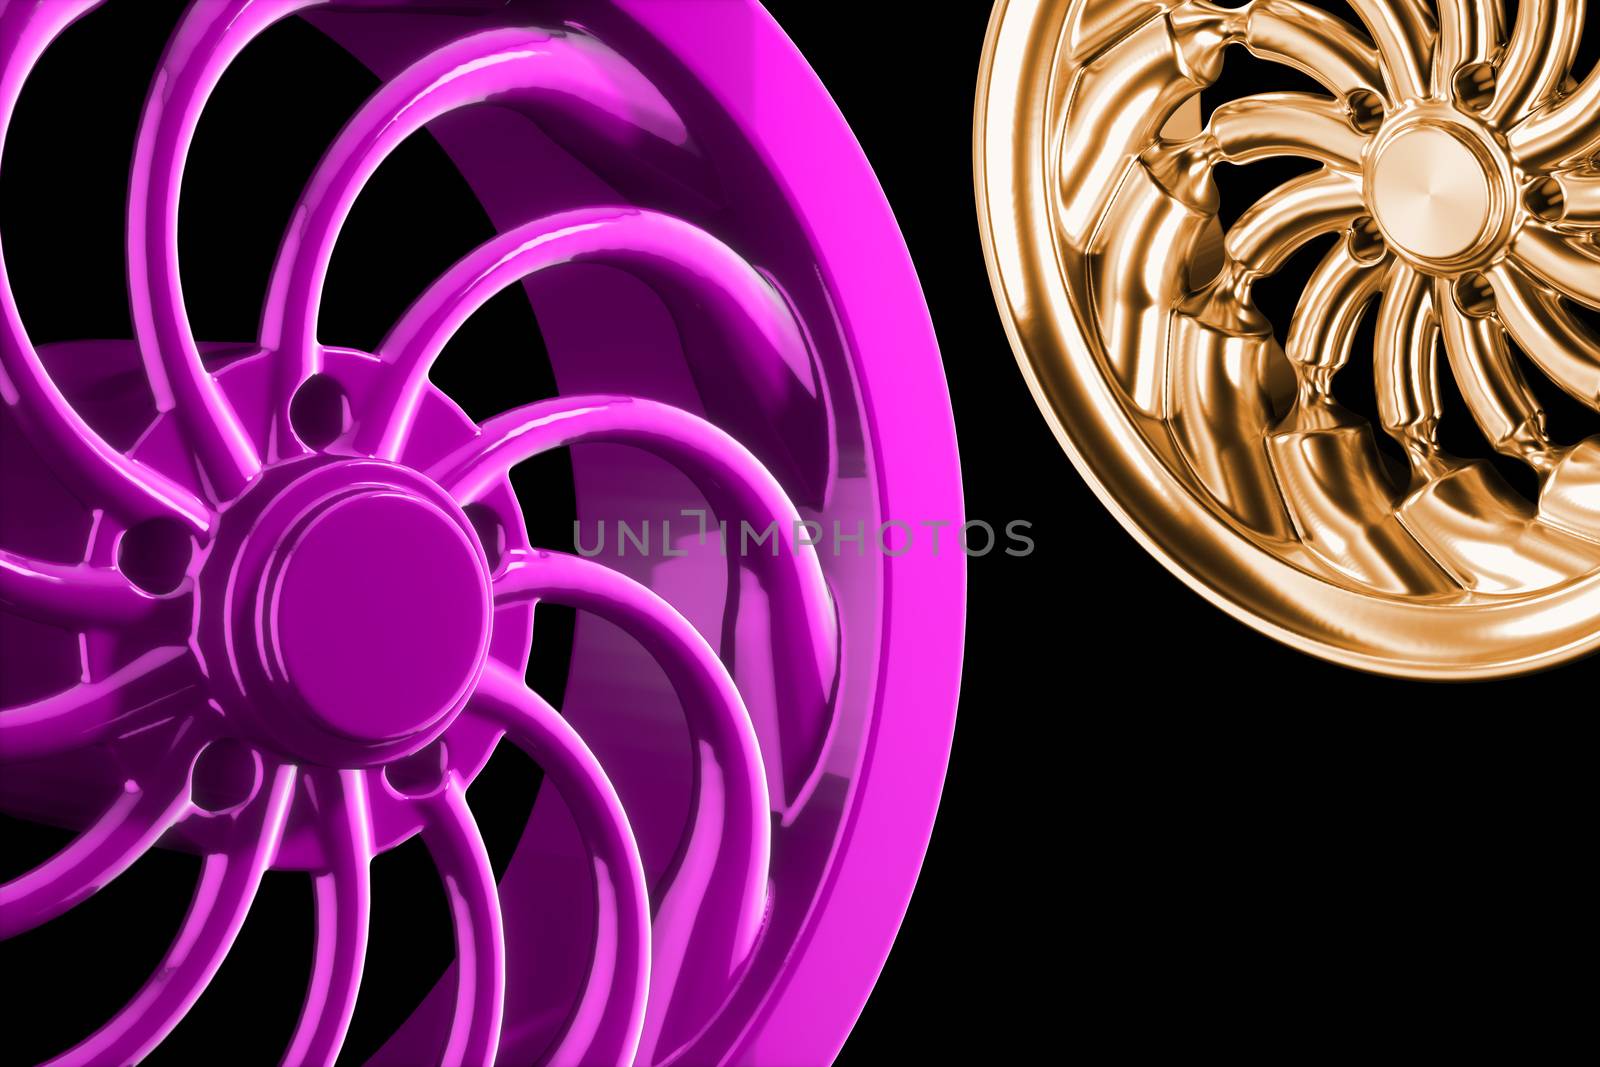 Abstract chrome sports car wheels isolated on a black background 3d illustration.